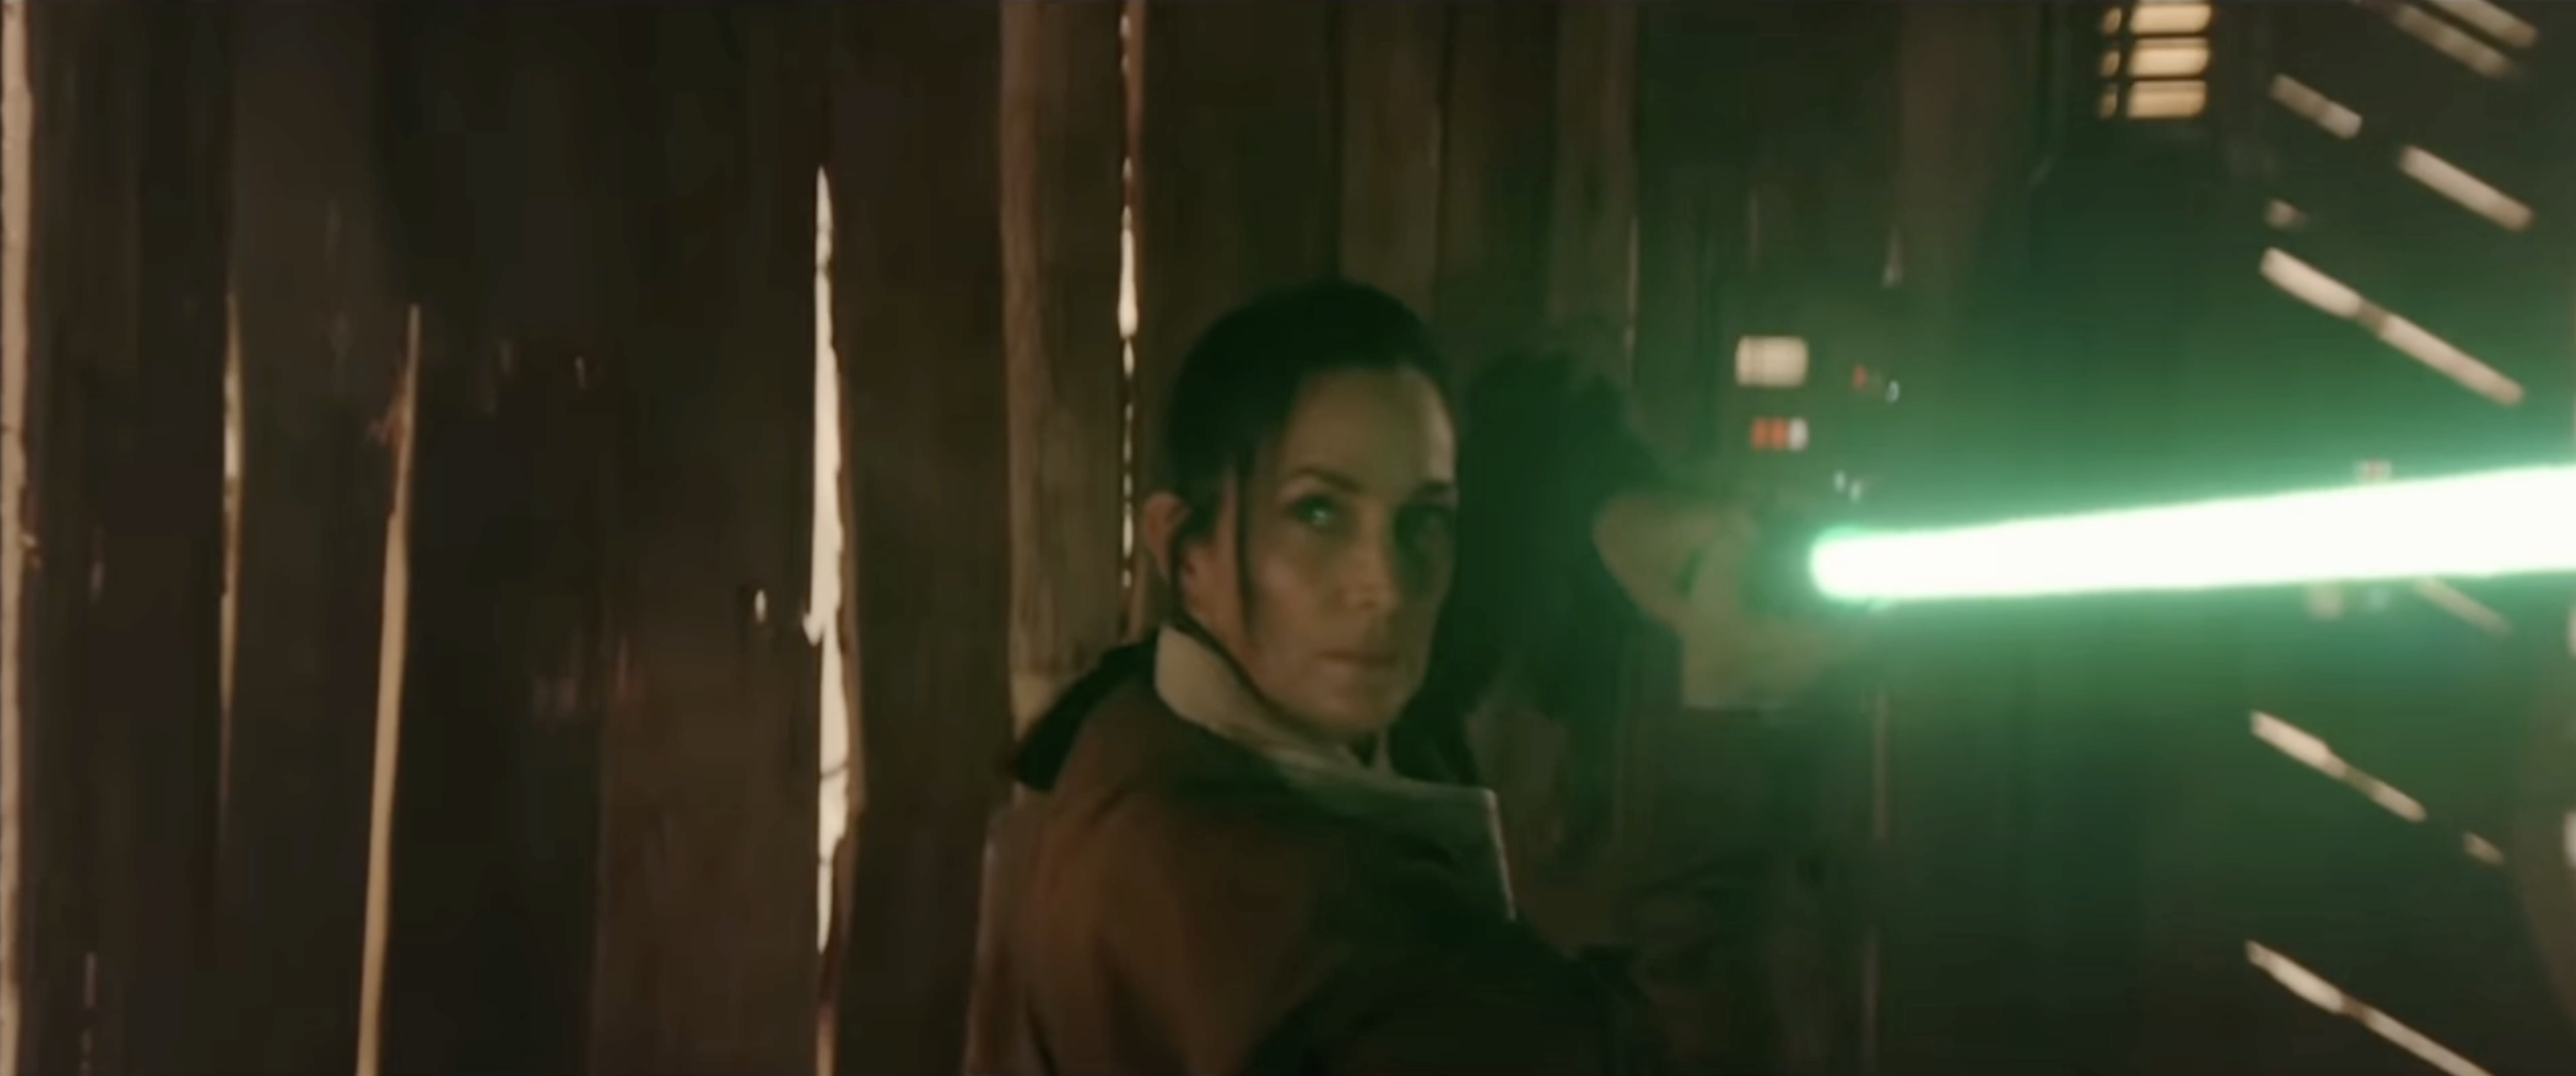 Carrie-Anne Moss in 'The Acolyte', coming to Disney+ on June 4.